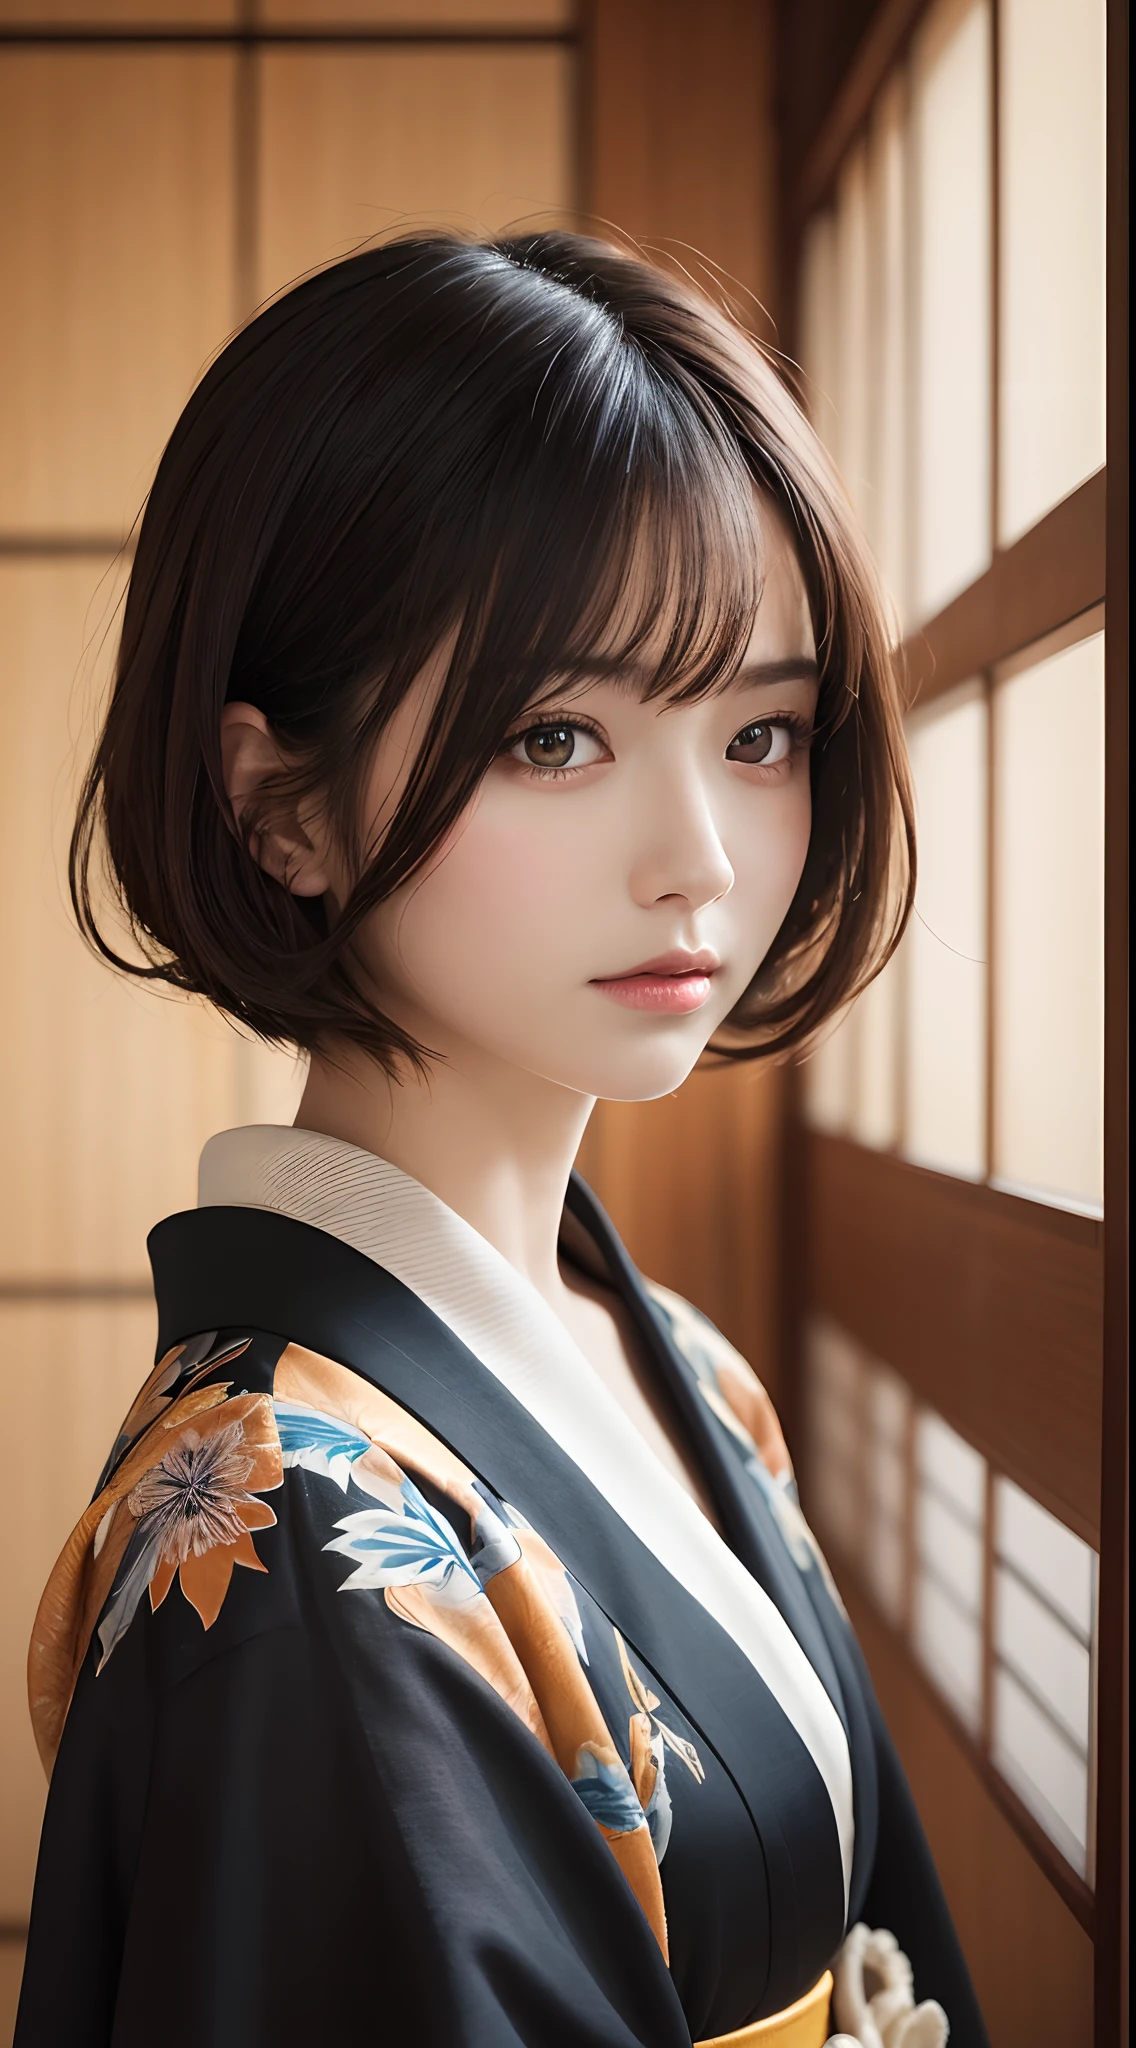 masutepiece, Best Quality, Illustration, Ultra-detailed, finely detail, hight resolution, 8K Wallpaper, Perfect dynamic composition, Beautiful detailed eyes, Kimono, (black-short-hair)